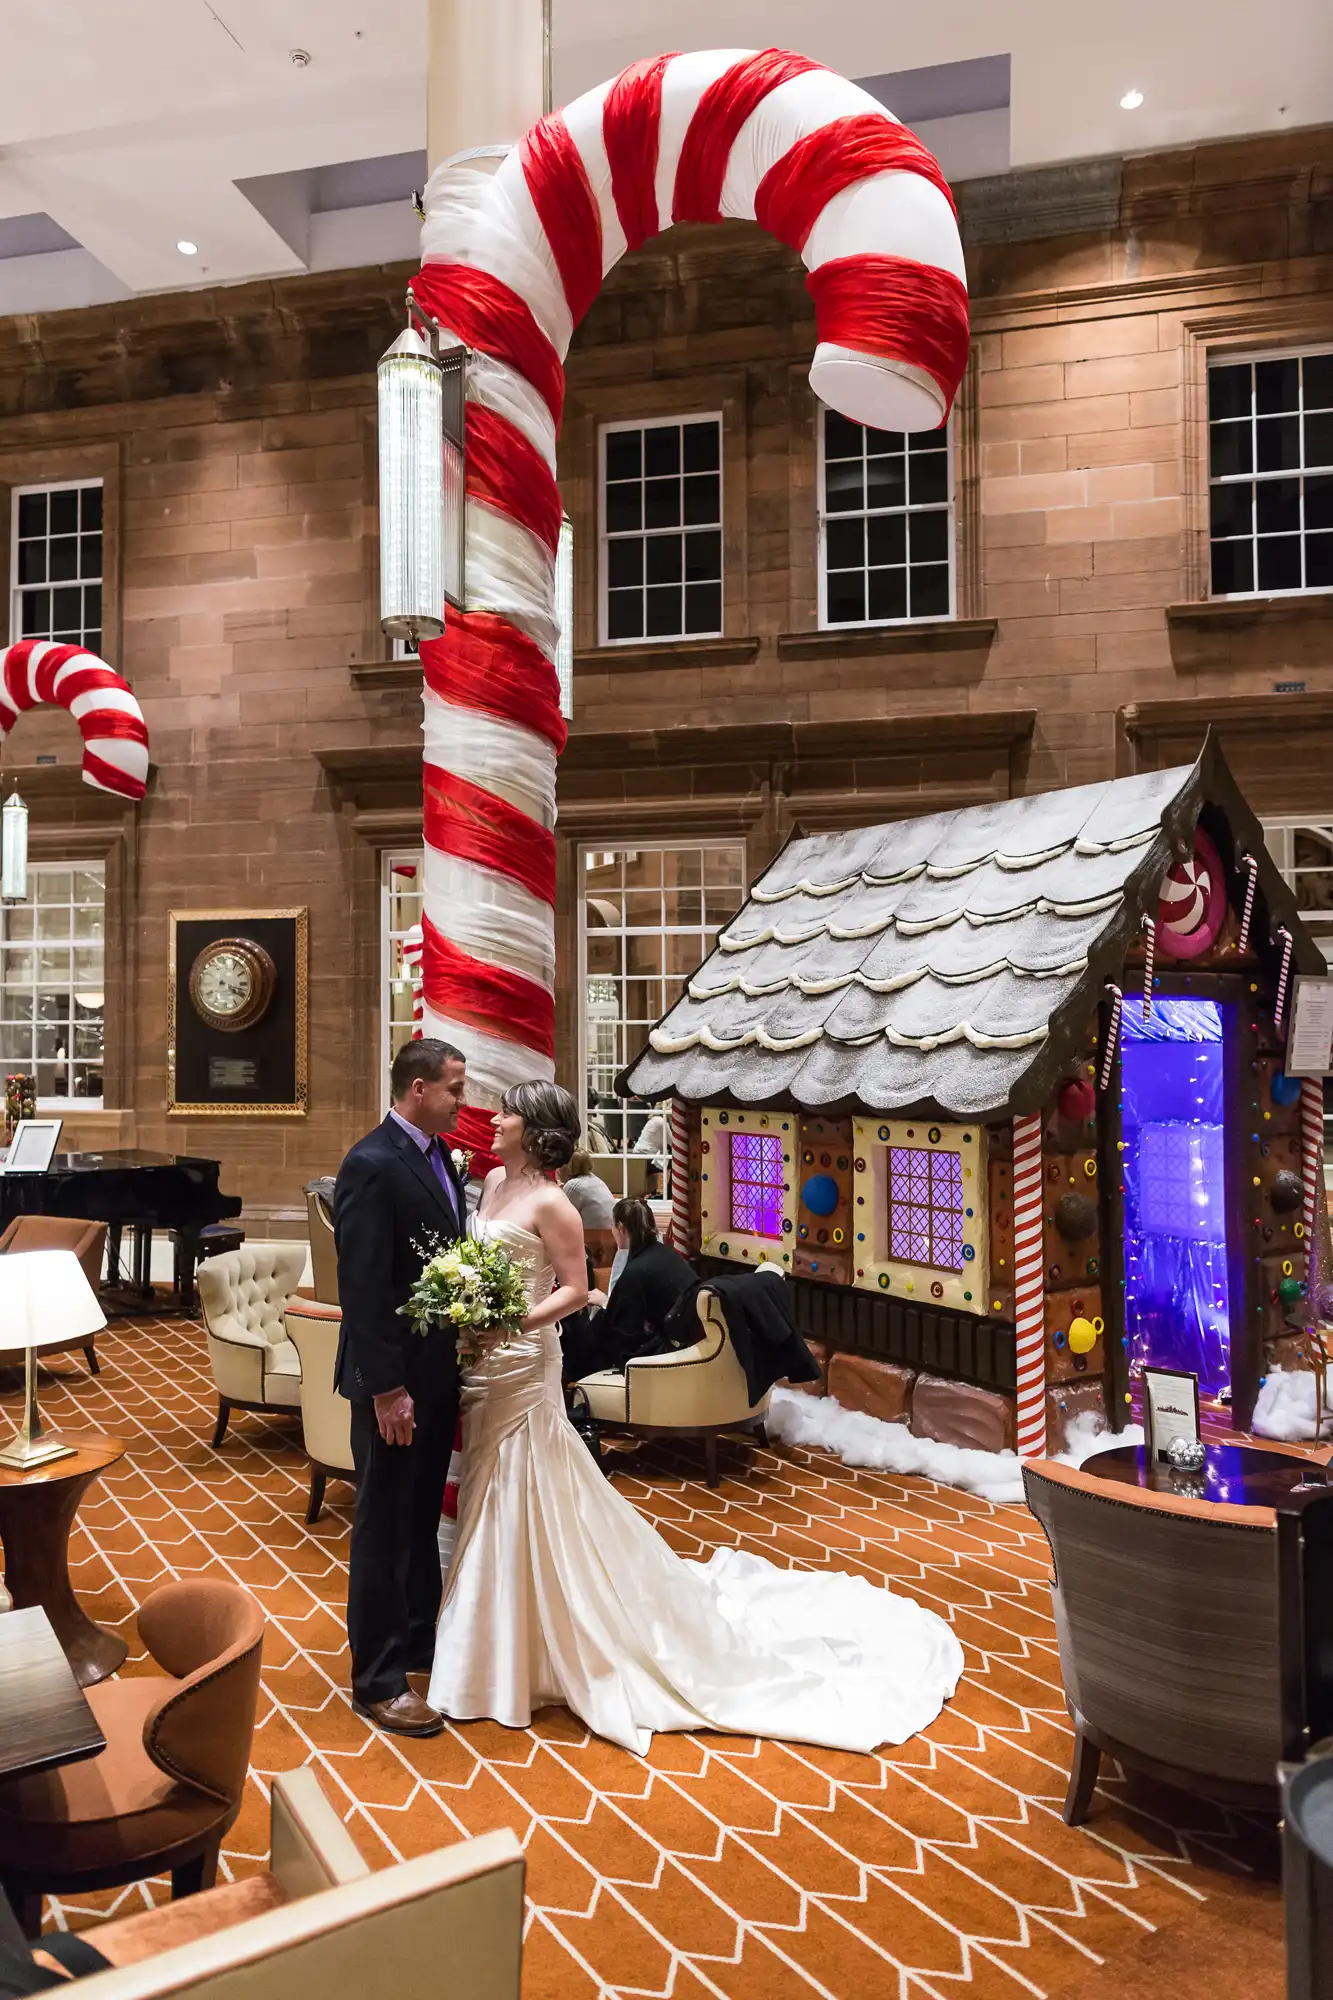 Newlywed couple posing in a hotel lobby with a large candy cane arch and a gingerbread house in the background.